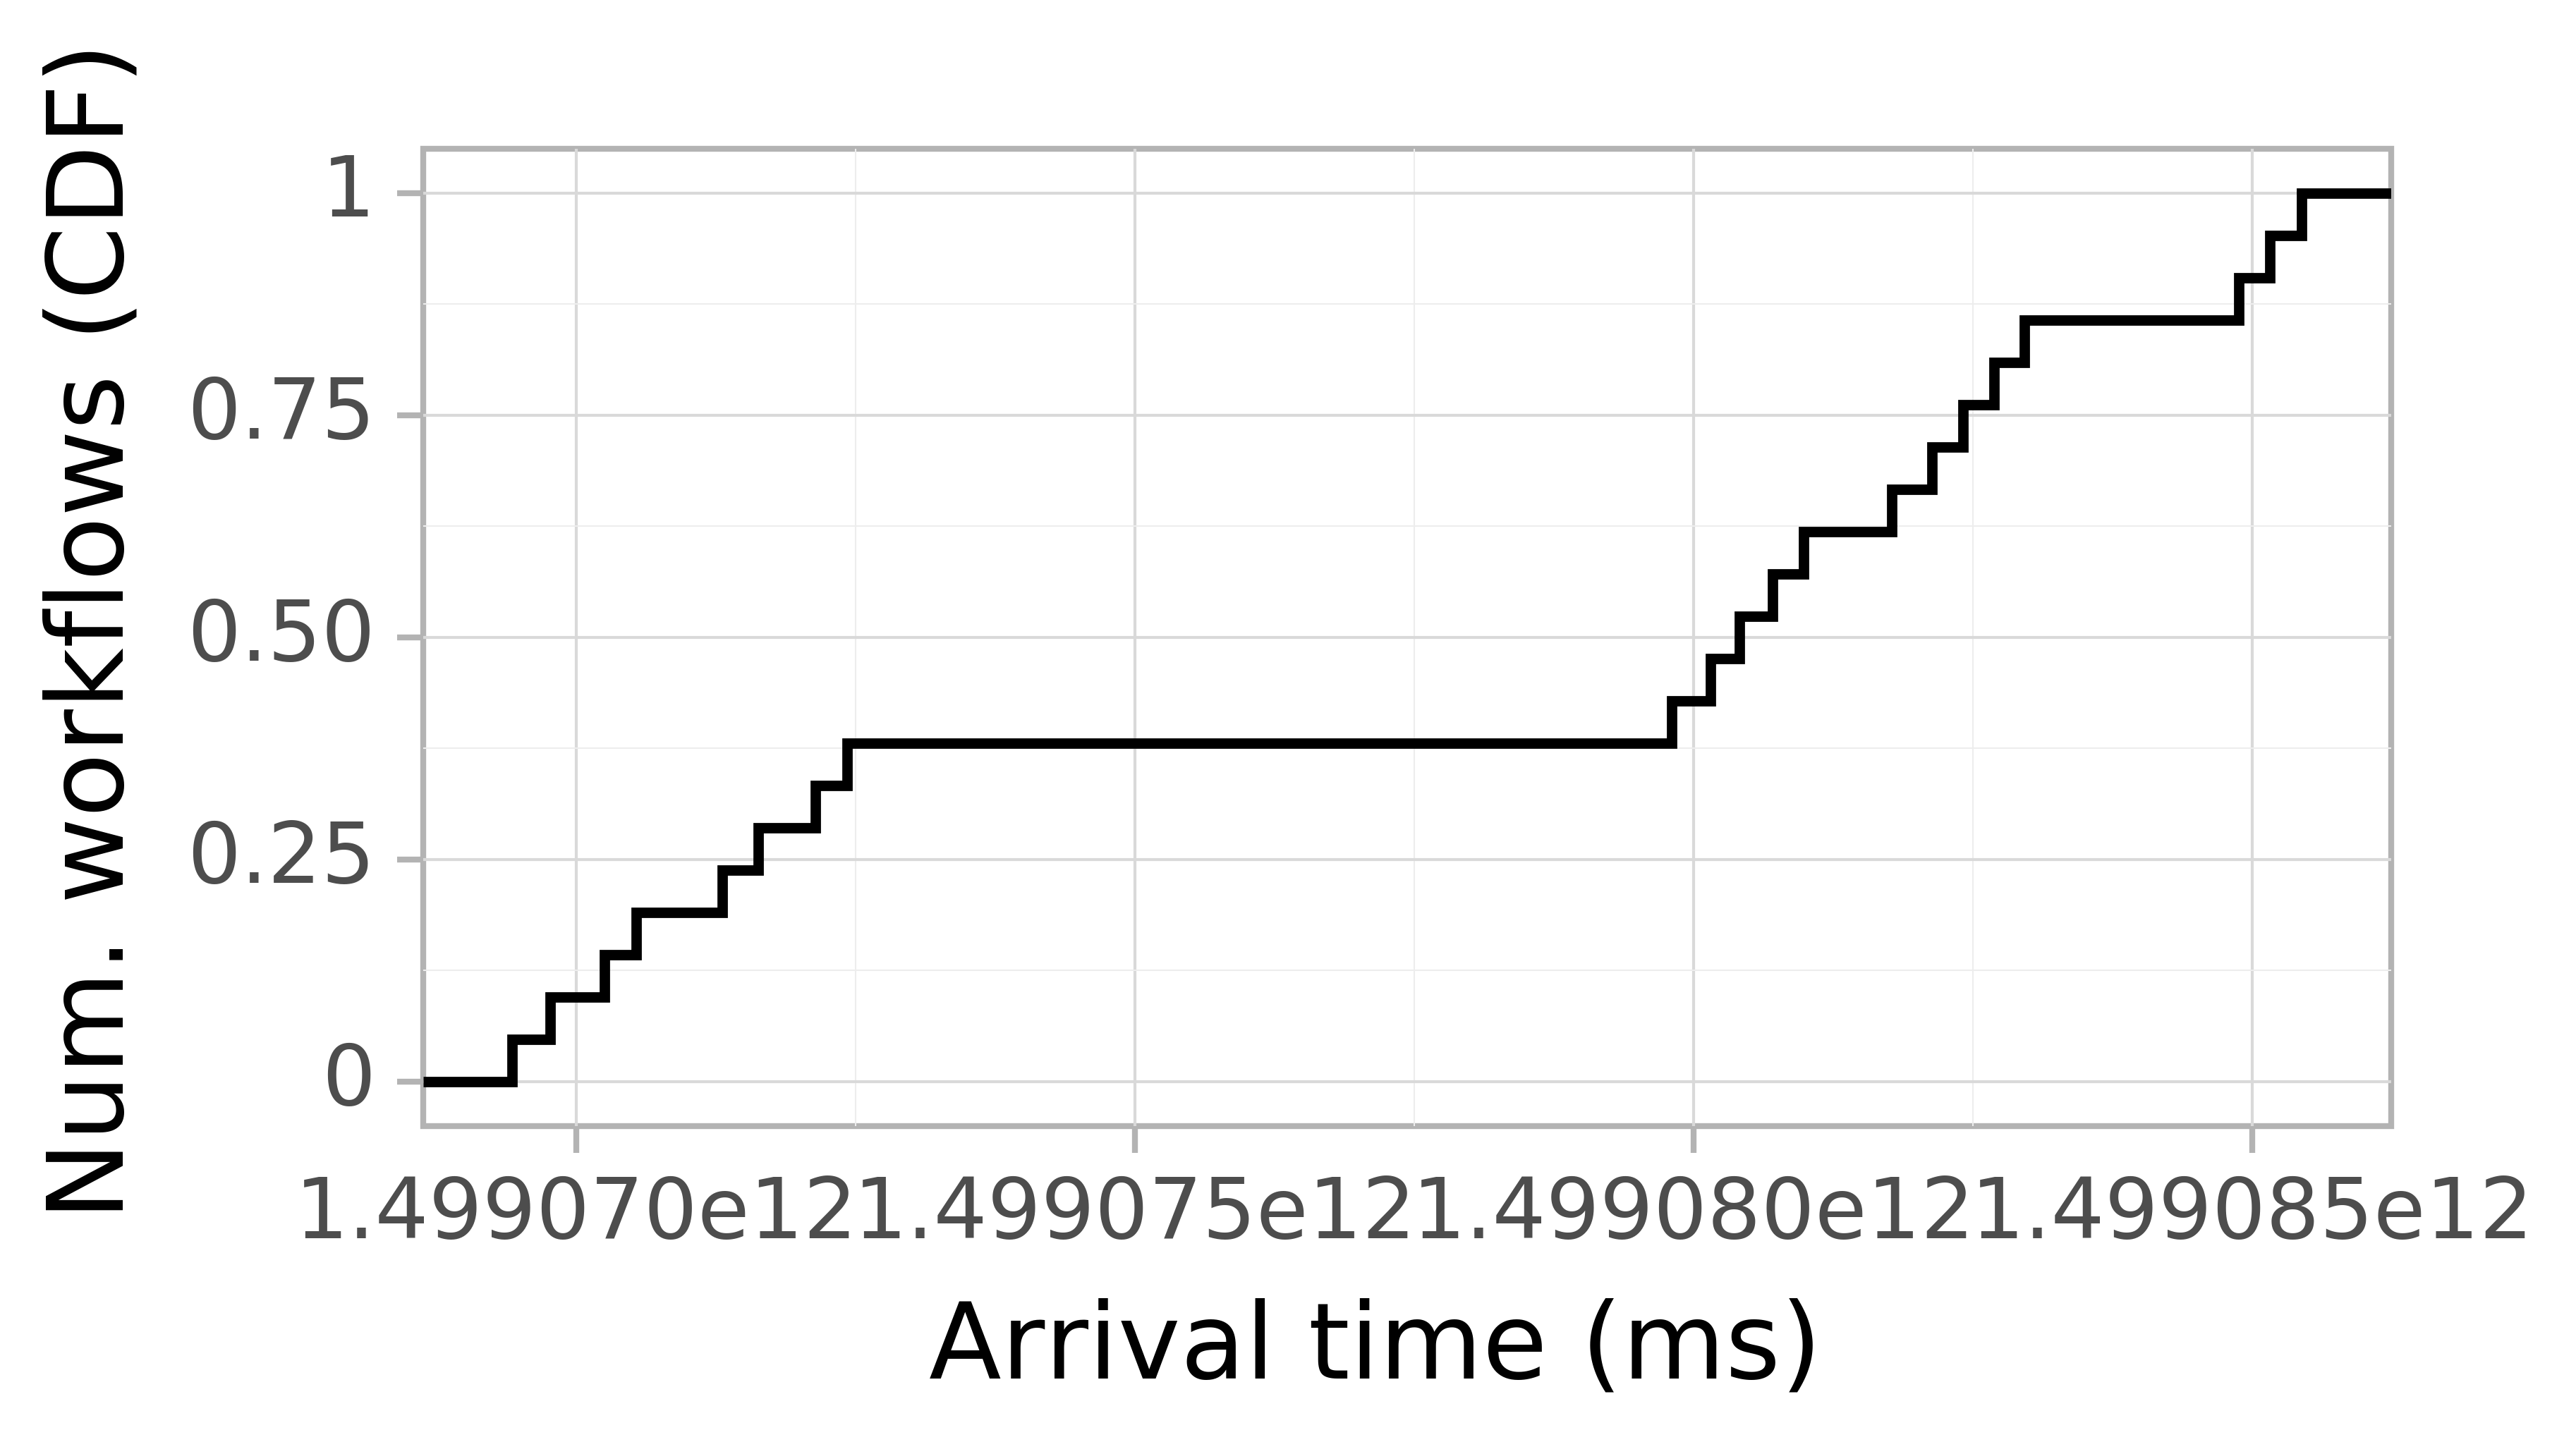 Job arrival CDF graph for the askalon-new_ee34 trace.